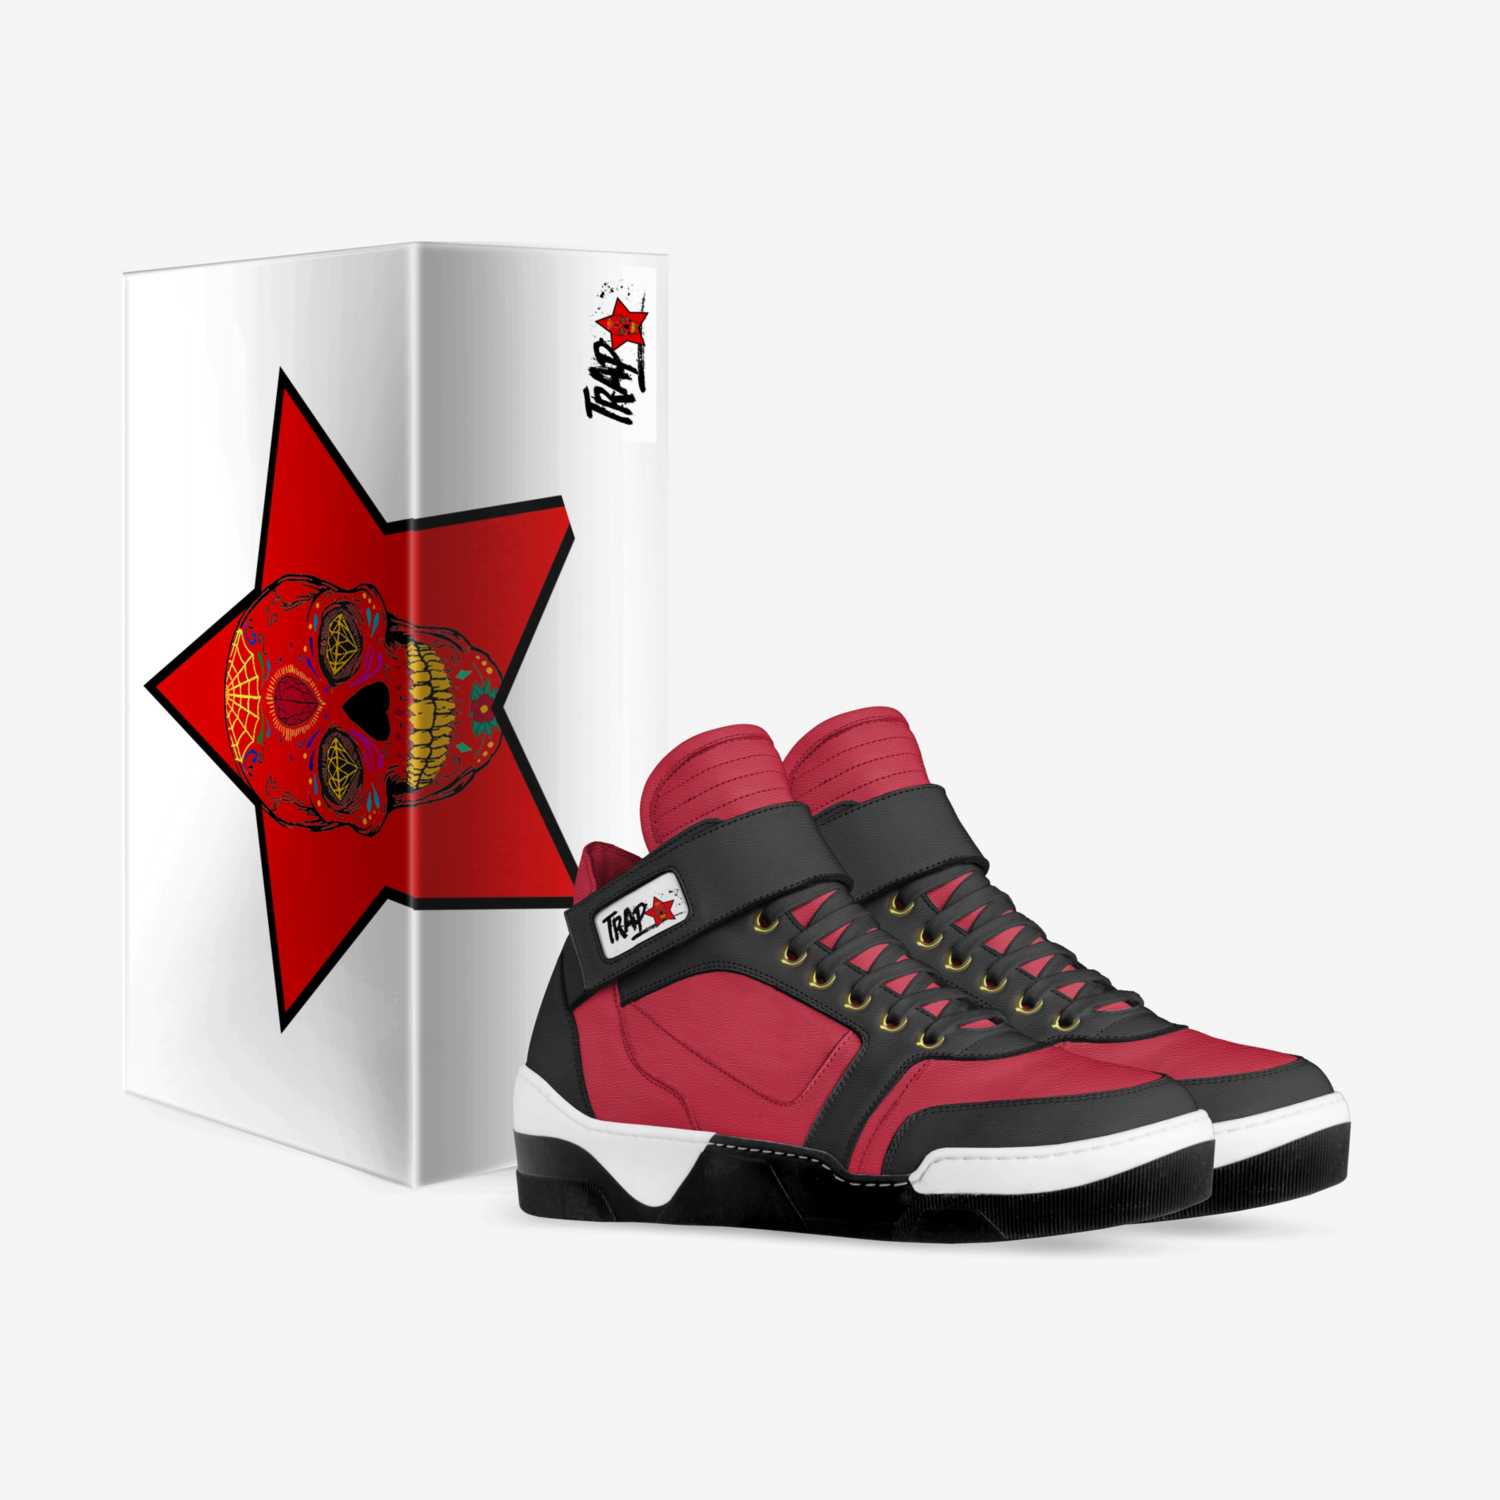 trap stars custom made in Italy shoes by Erik Sosa | Box view